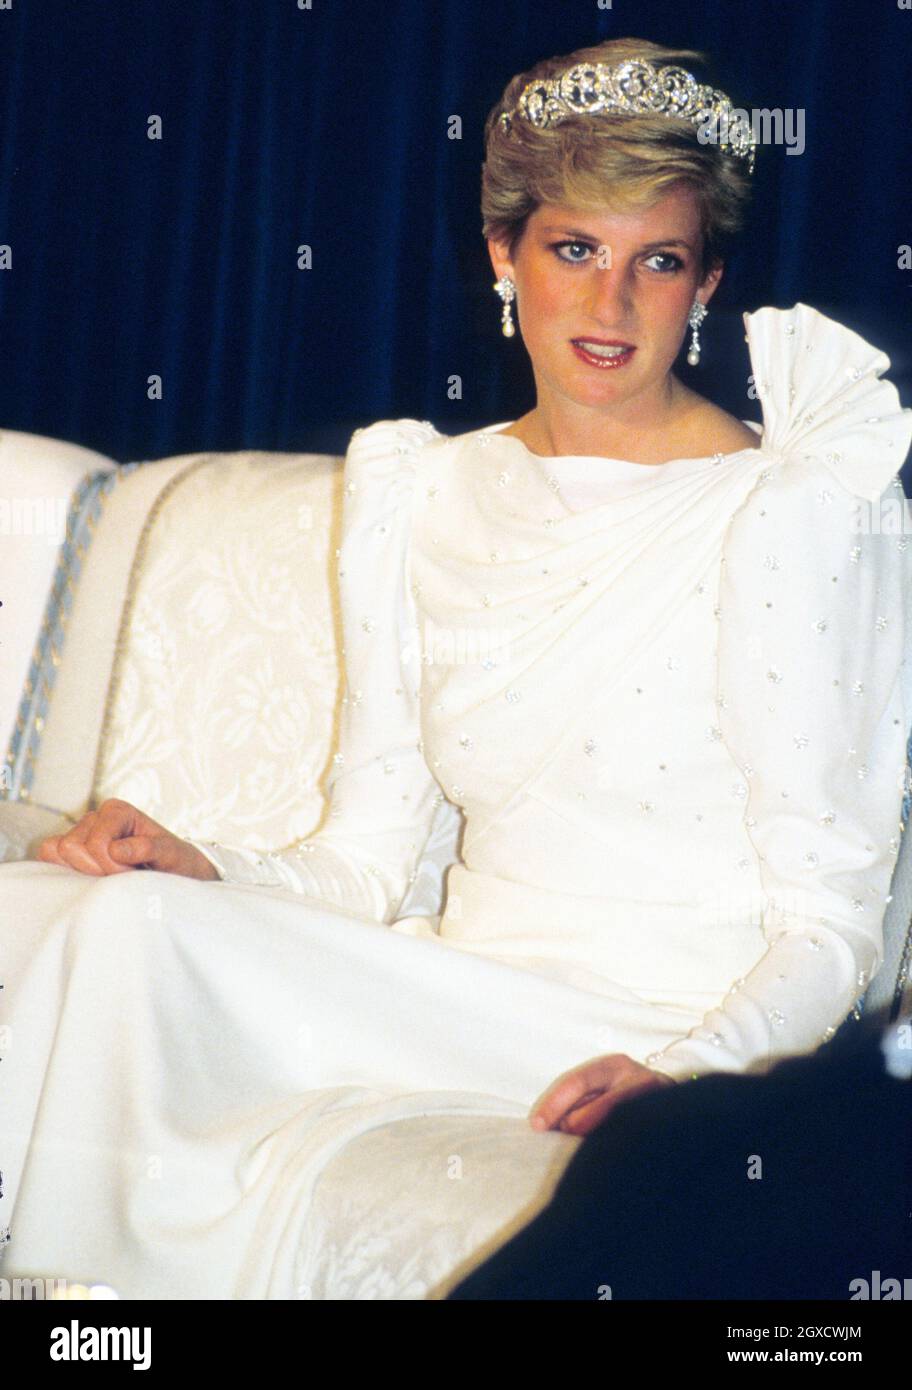 **FILE PHOTO** Diana, Princess of Wales wears a silk Emanuel dress during her visit to the Gulf State of Bahrain in November 1986. Designers Elizabeth and David Emanuel are holding an auction of dresses worn by the late Princess Diana. The dresses are to go up for auction on June 8, 2010 in London, at specialist vintage fashion auctioneers Kerry Taylor Auctions.  Stock Photo